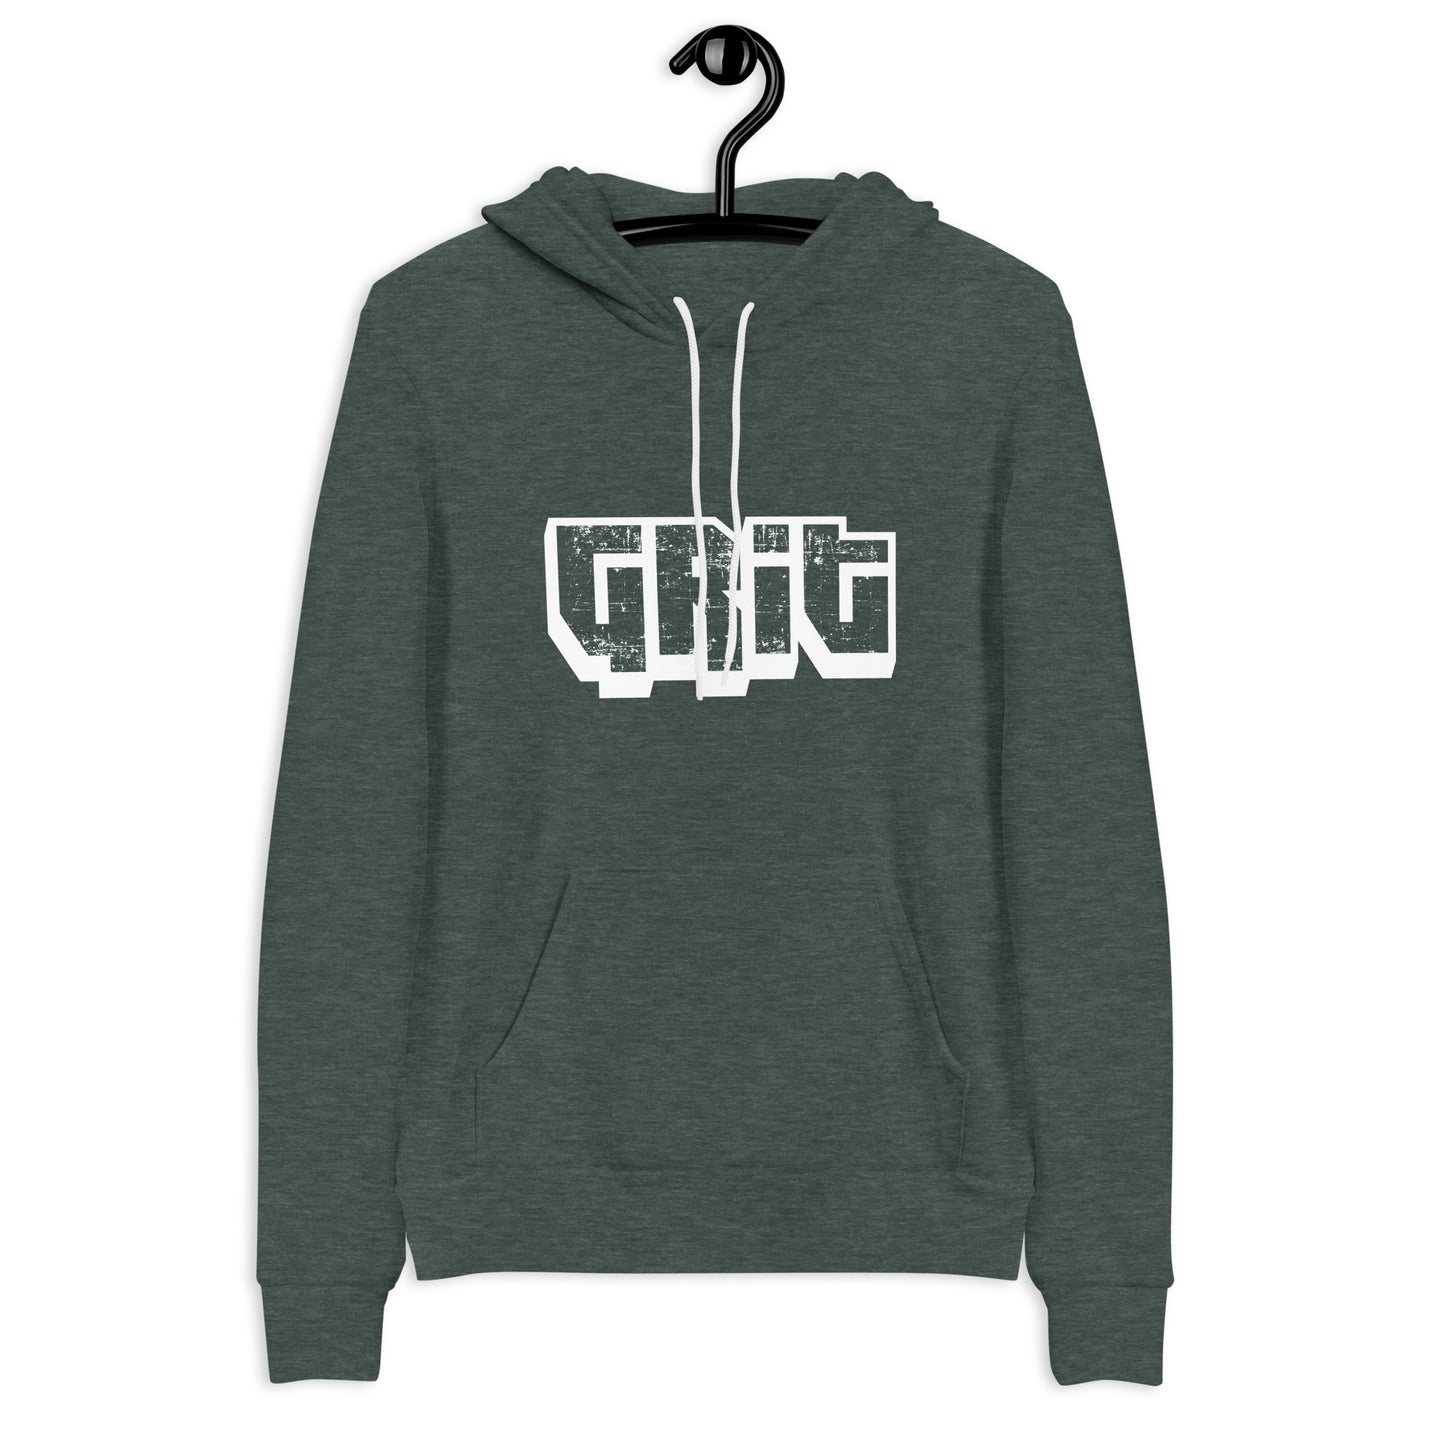 Grit Soft and Slouchy Unisex hoodie